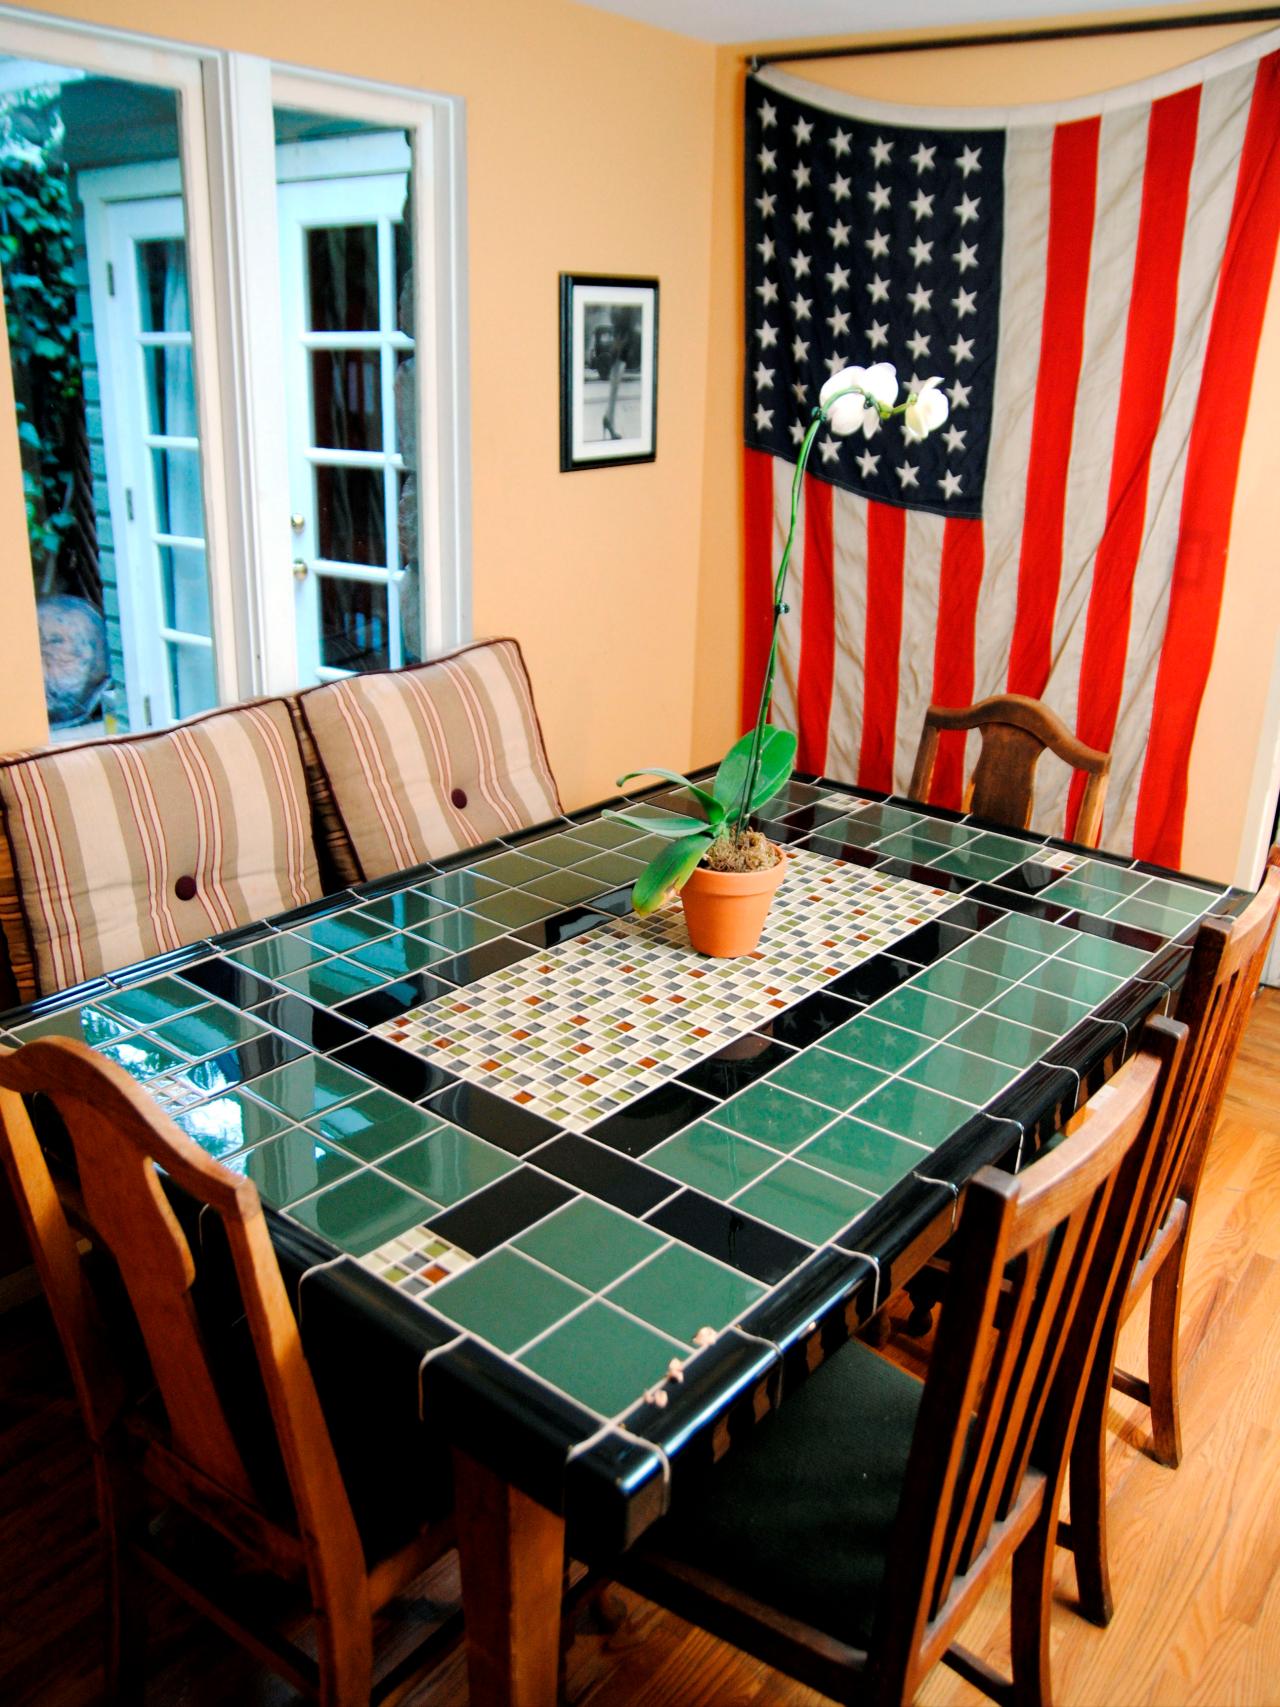 Create A Mosaic Tile Tabletop, How To Make A Simple Table Top